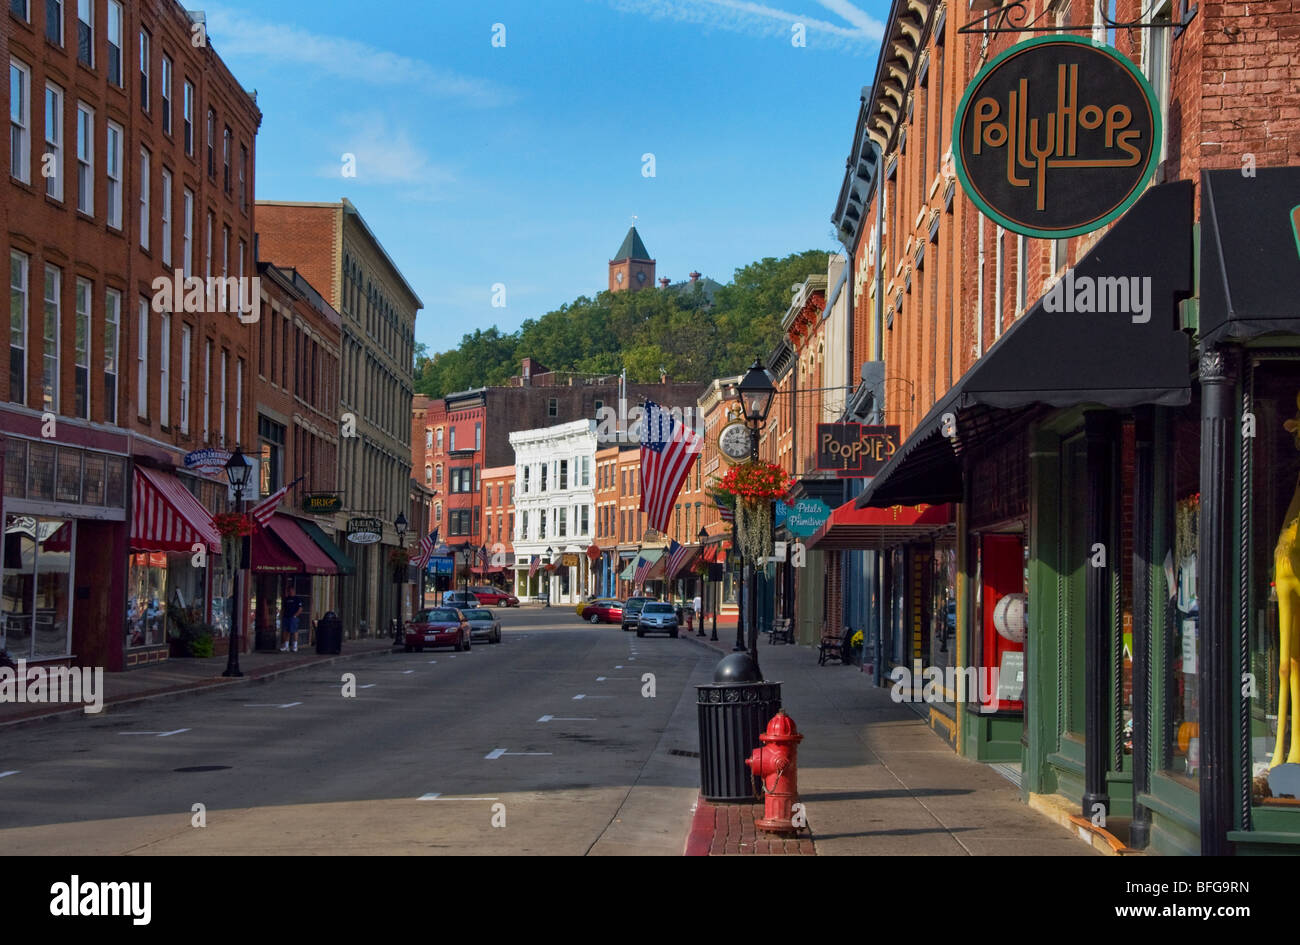 Shops In The Historic Downtown Of Galena Illinois A Popular Tourist